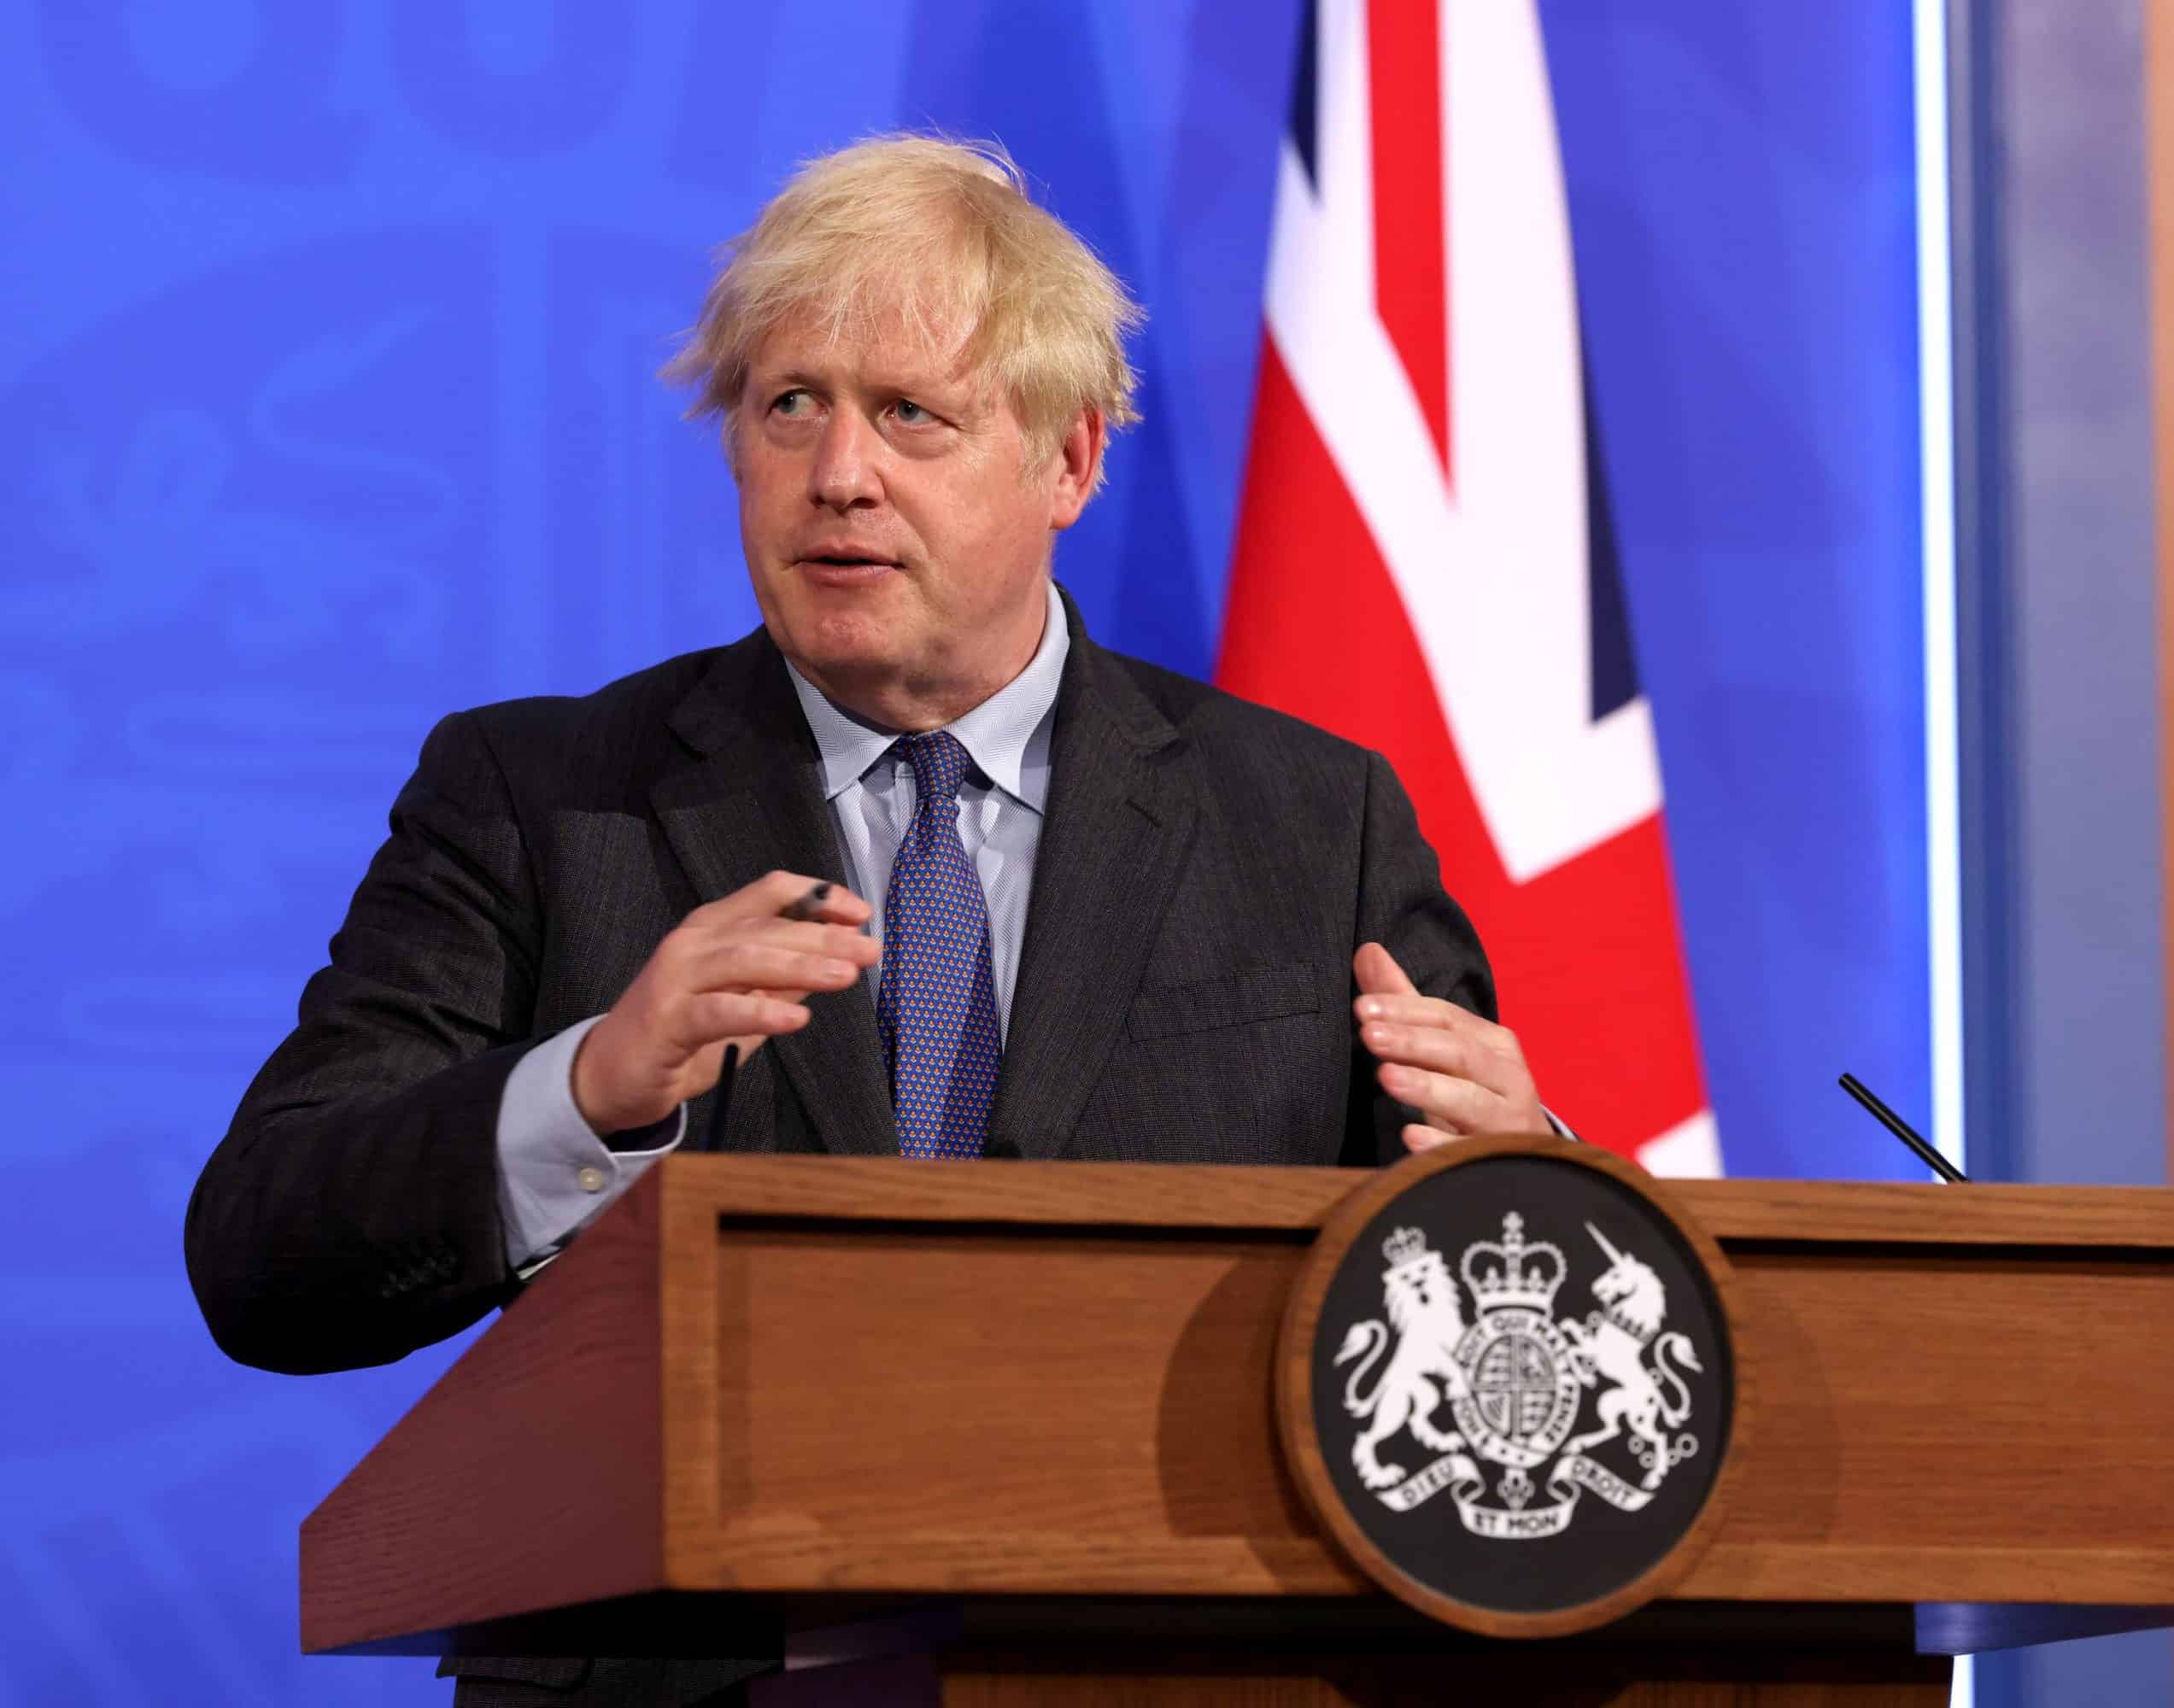 ‘This isn’t even real words’: Reaction to Johnson’s bumbling press conference